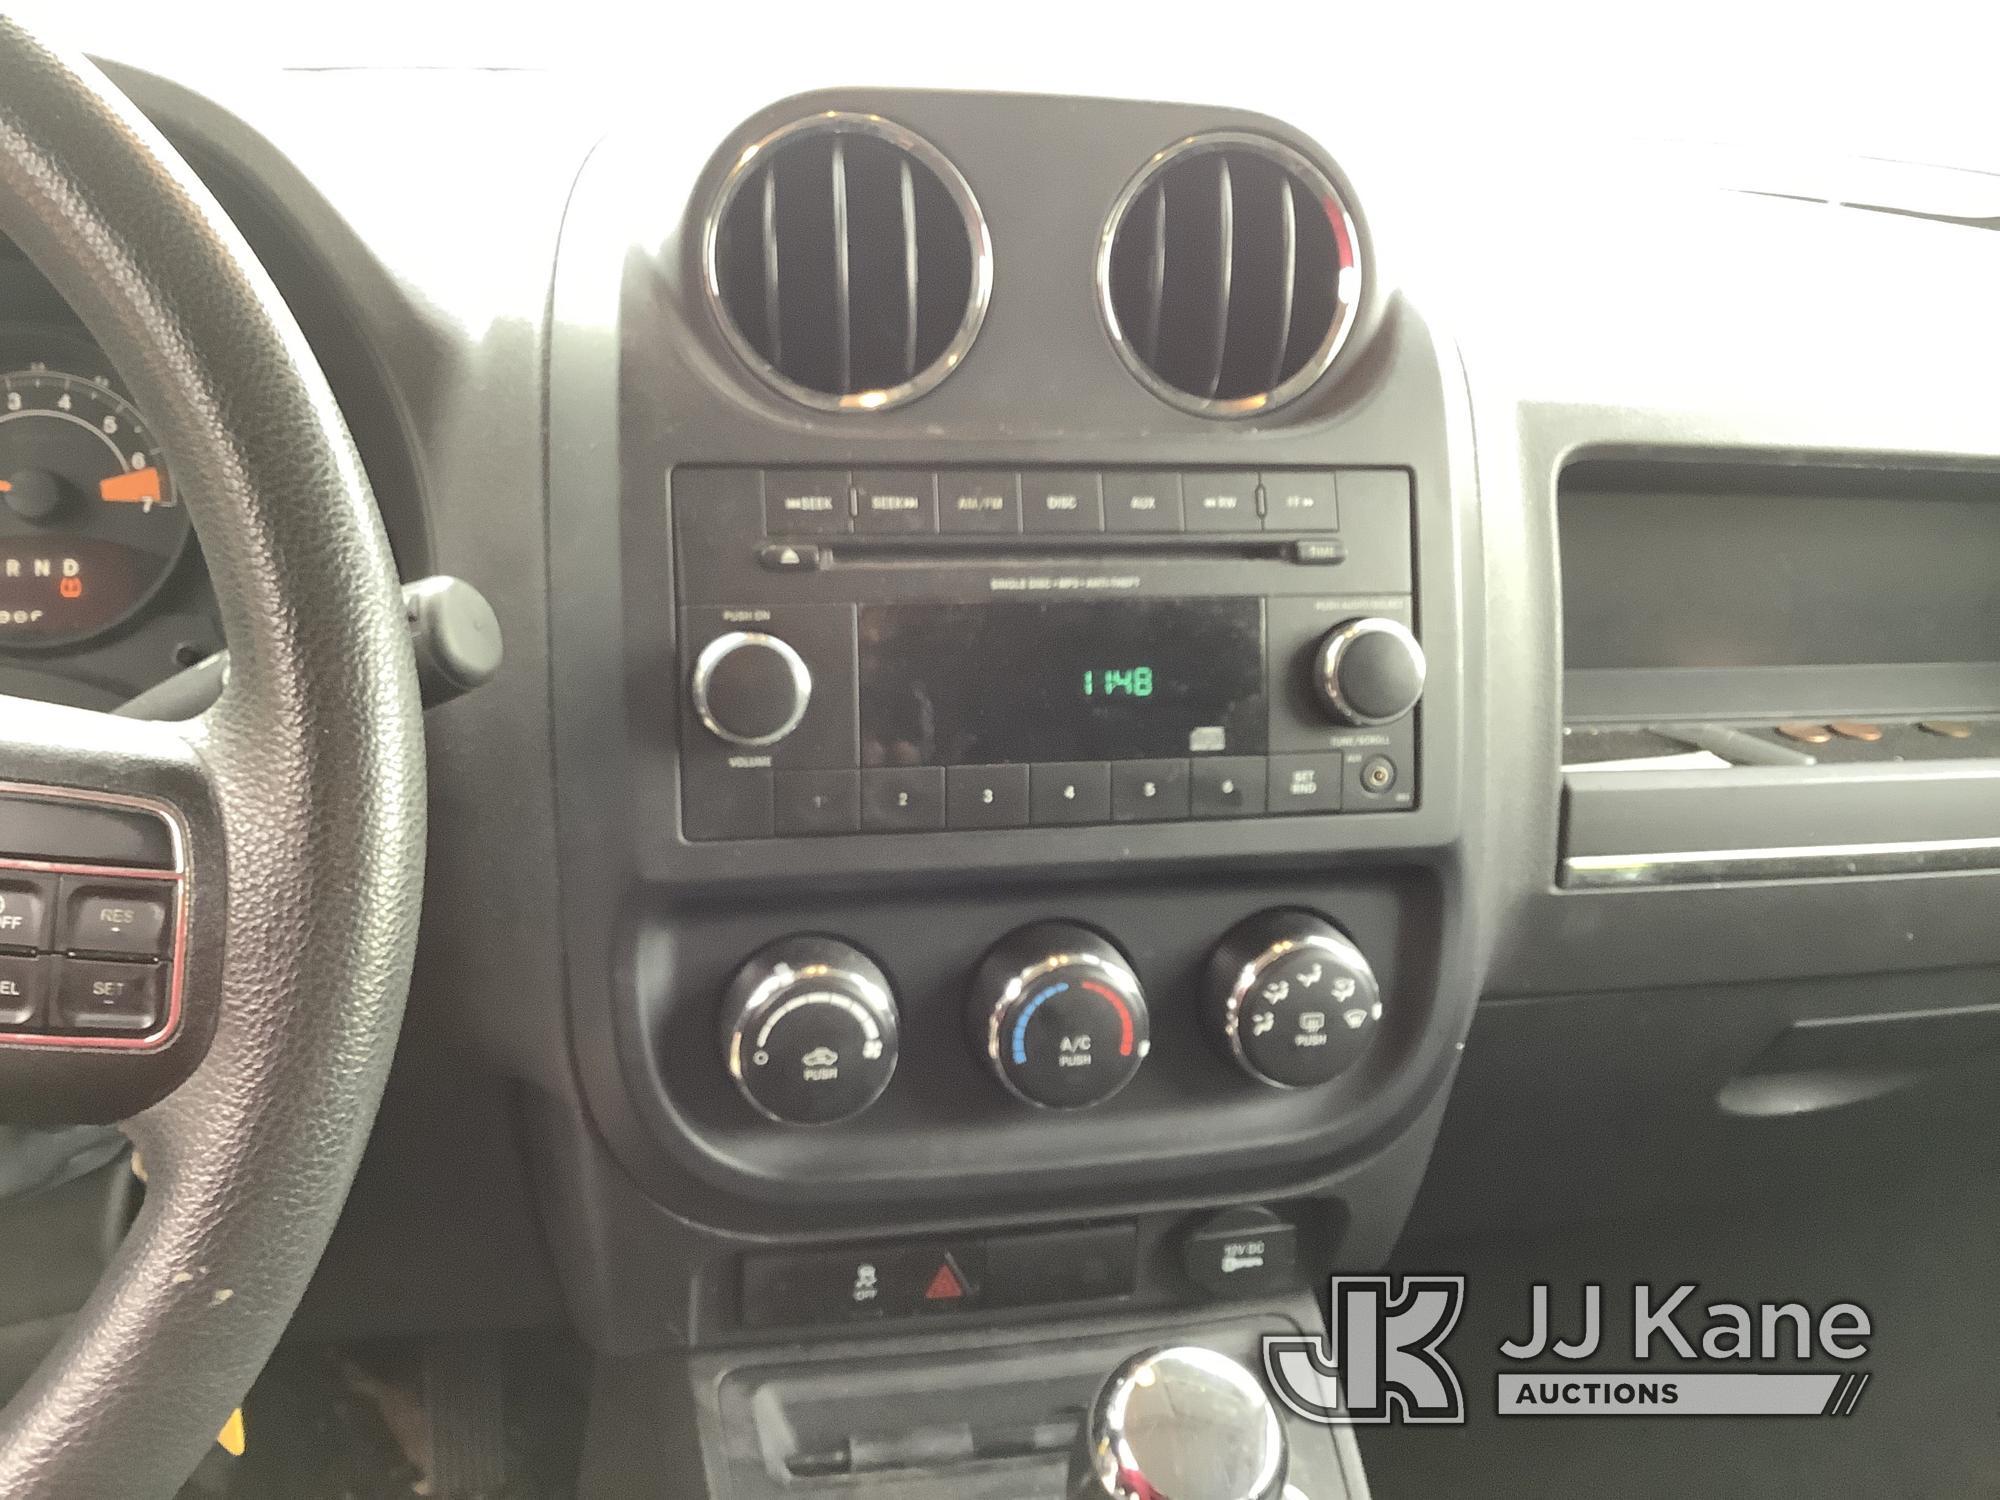 (Plymouth Meeting, PA) 2014 Jeep Patriot 4-Door Sport Utility Vehicle Runs & Moves, Body & Rust Dama